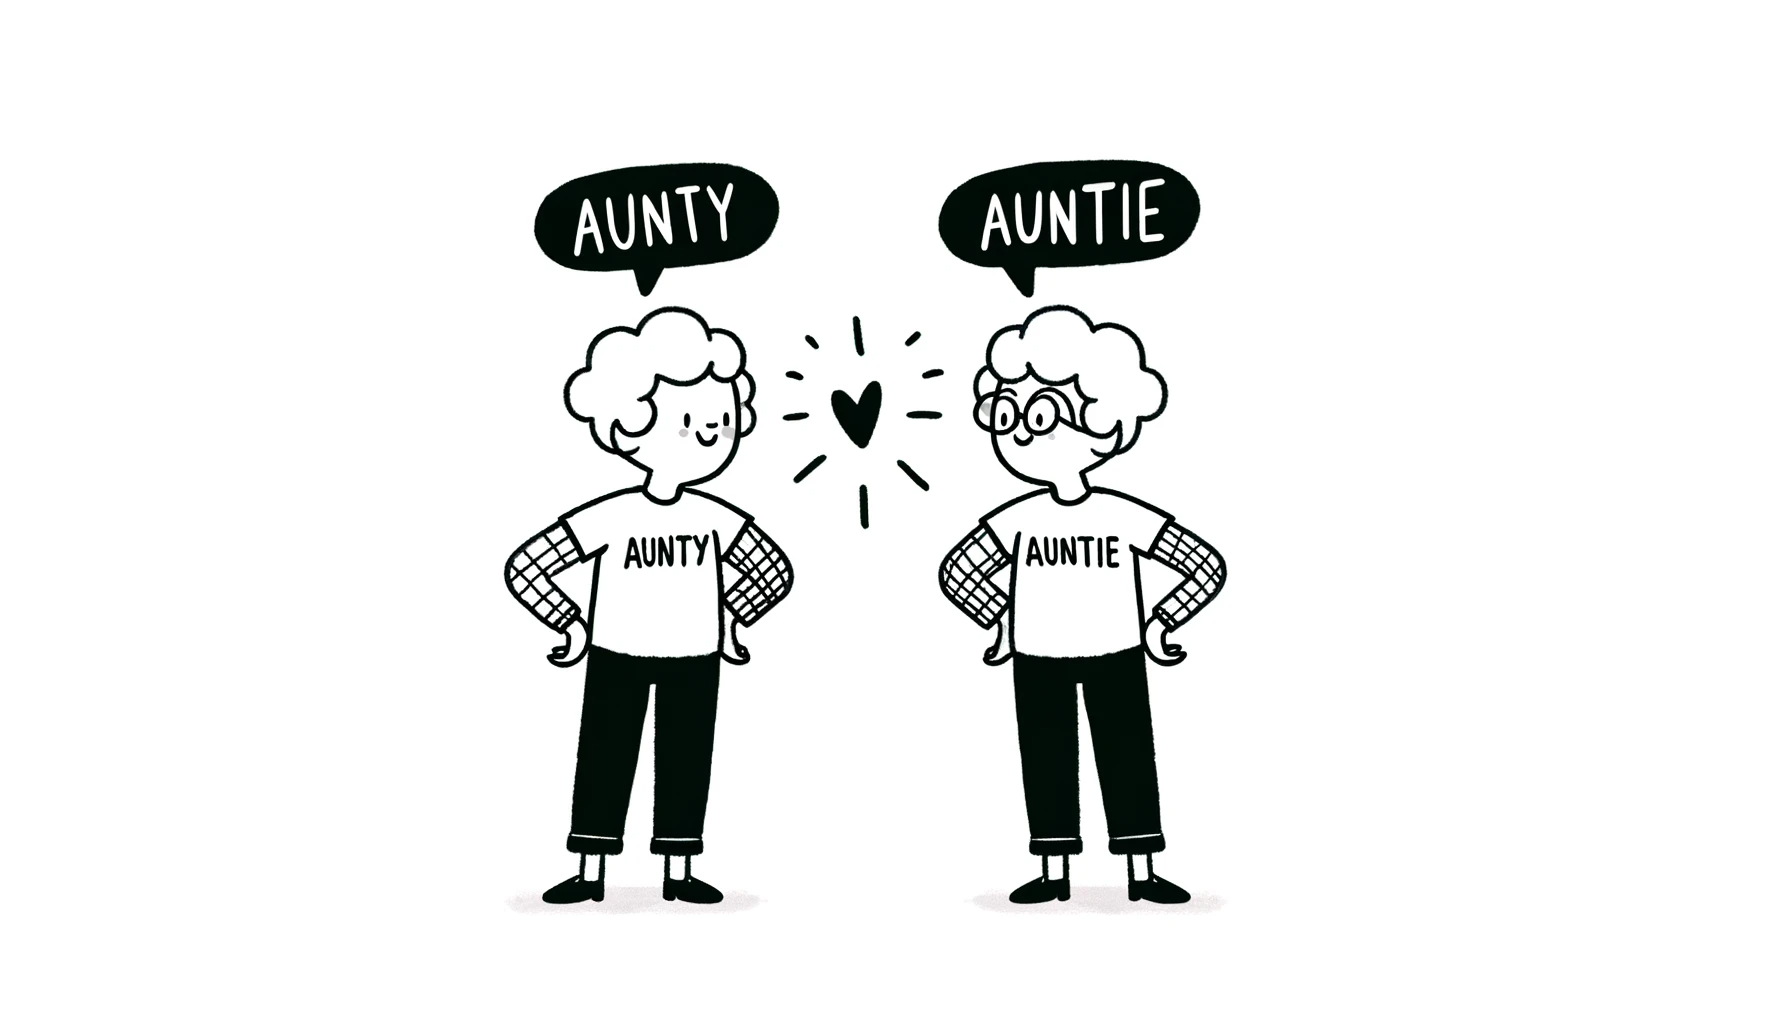 Aunty or Auntie: Which One is Correct?